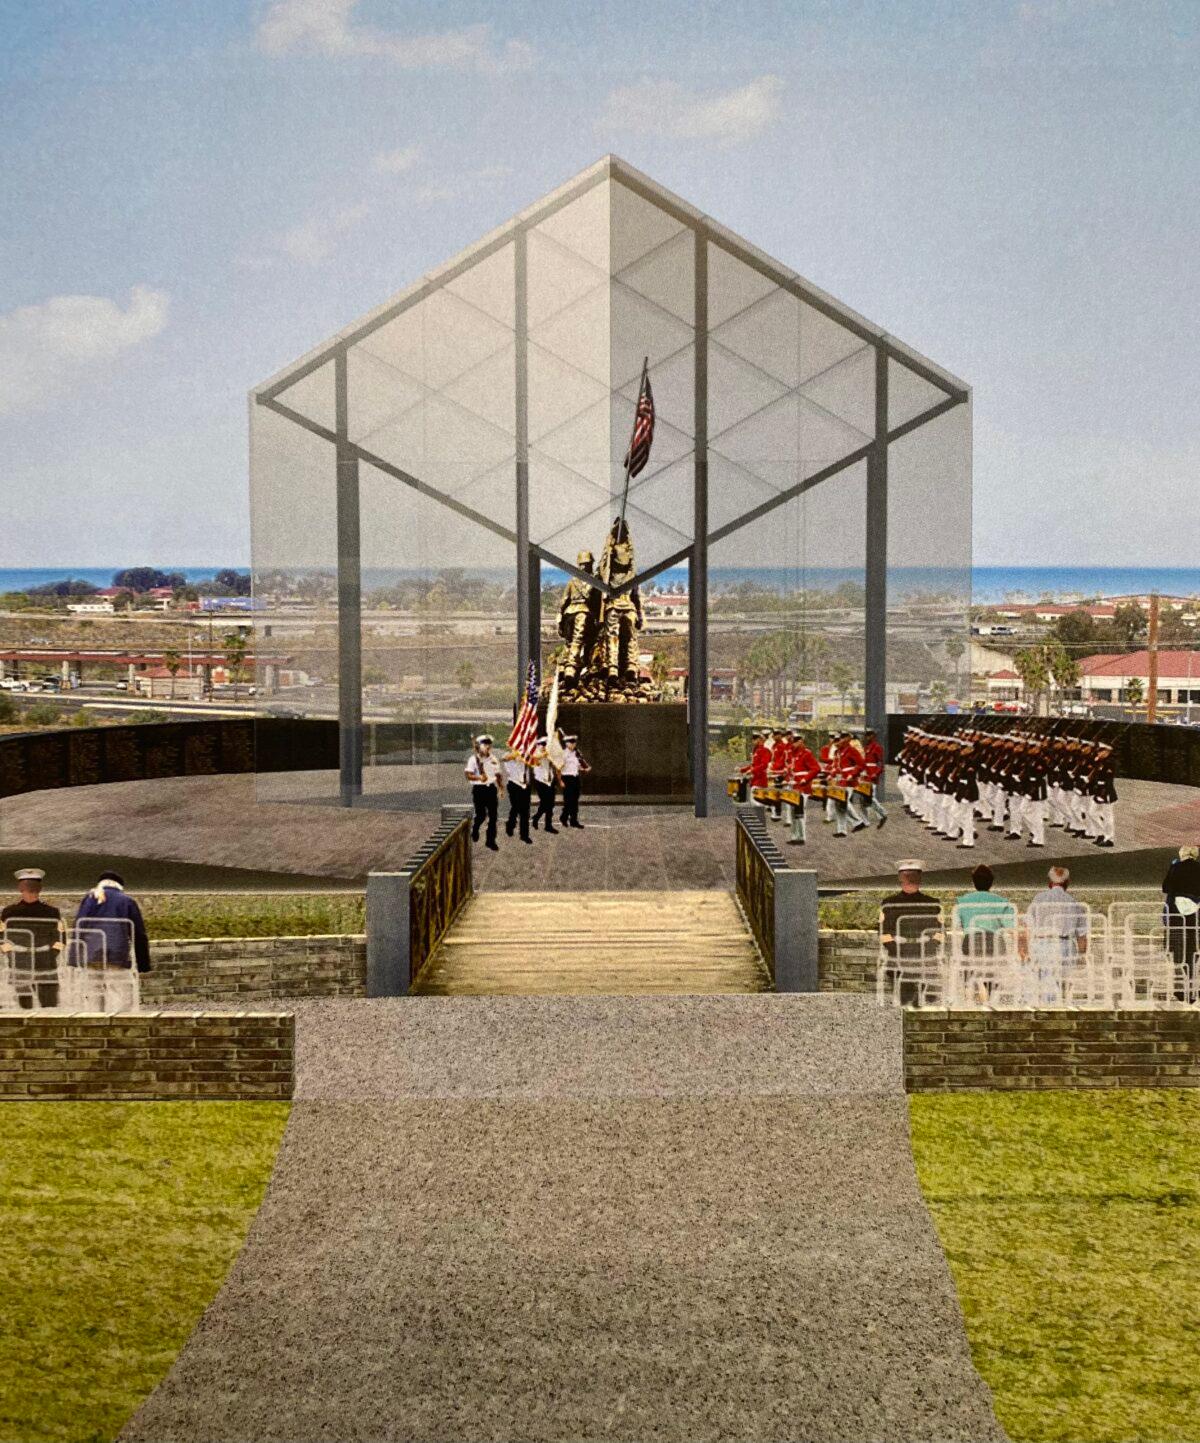  An artistic rendering of the Iwo Jima Flag Raising Memorial planned for Camp Pendleton in San Diego County, Calif. (Courtesy of Fentress Architects)